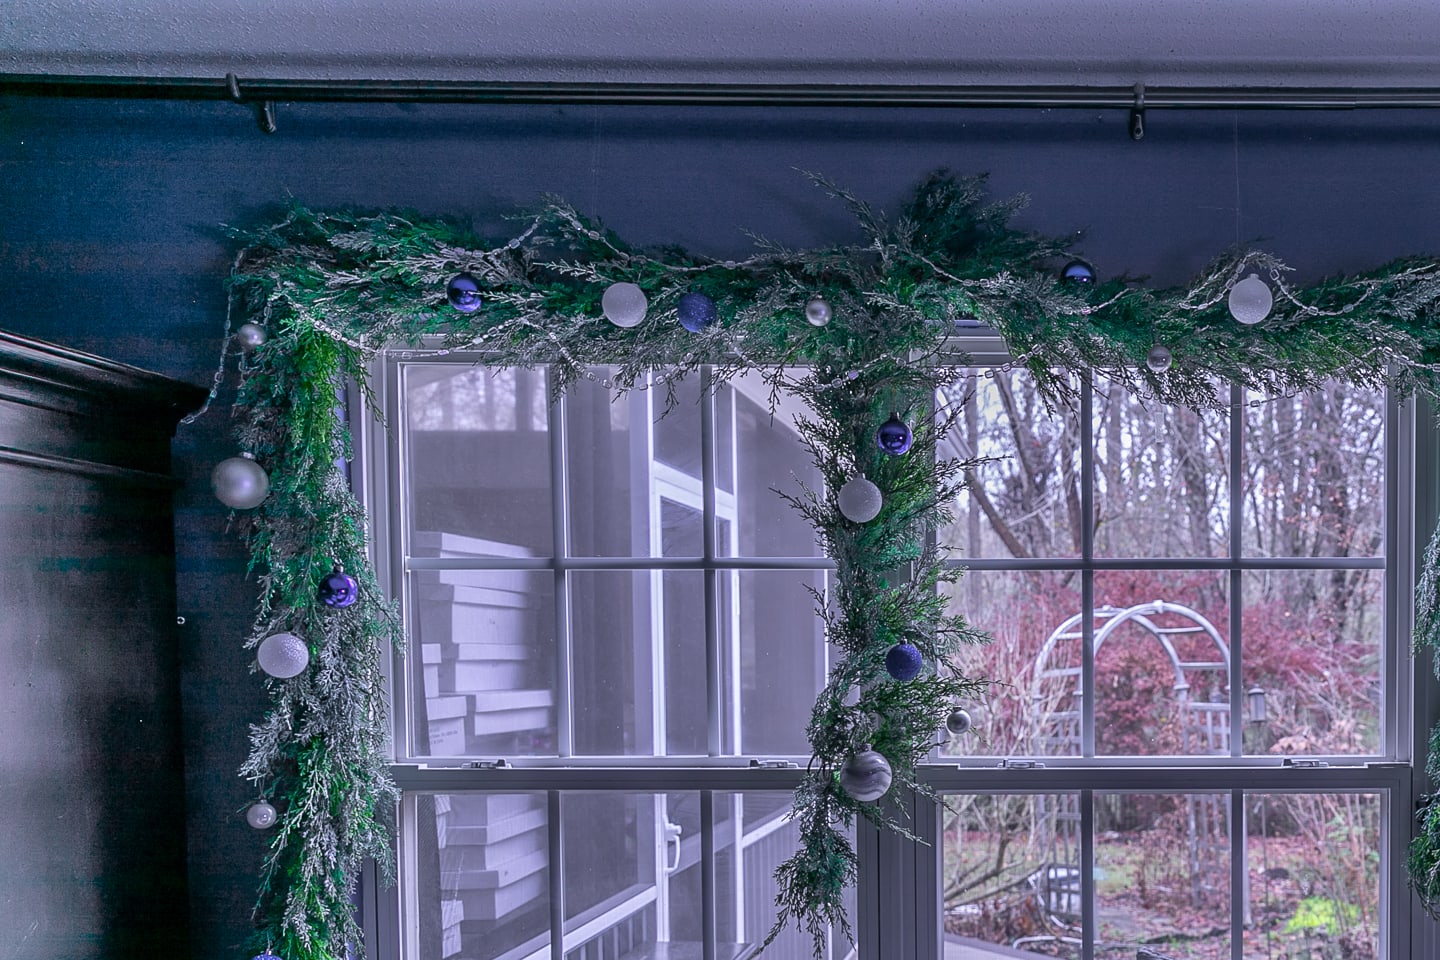 Ball Christmas ornaments and a string of glass beads hung from a garland over a window